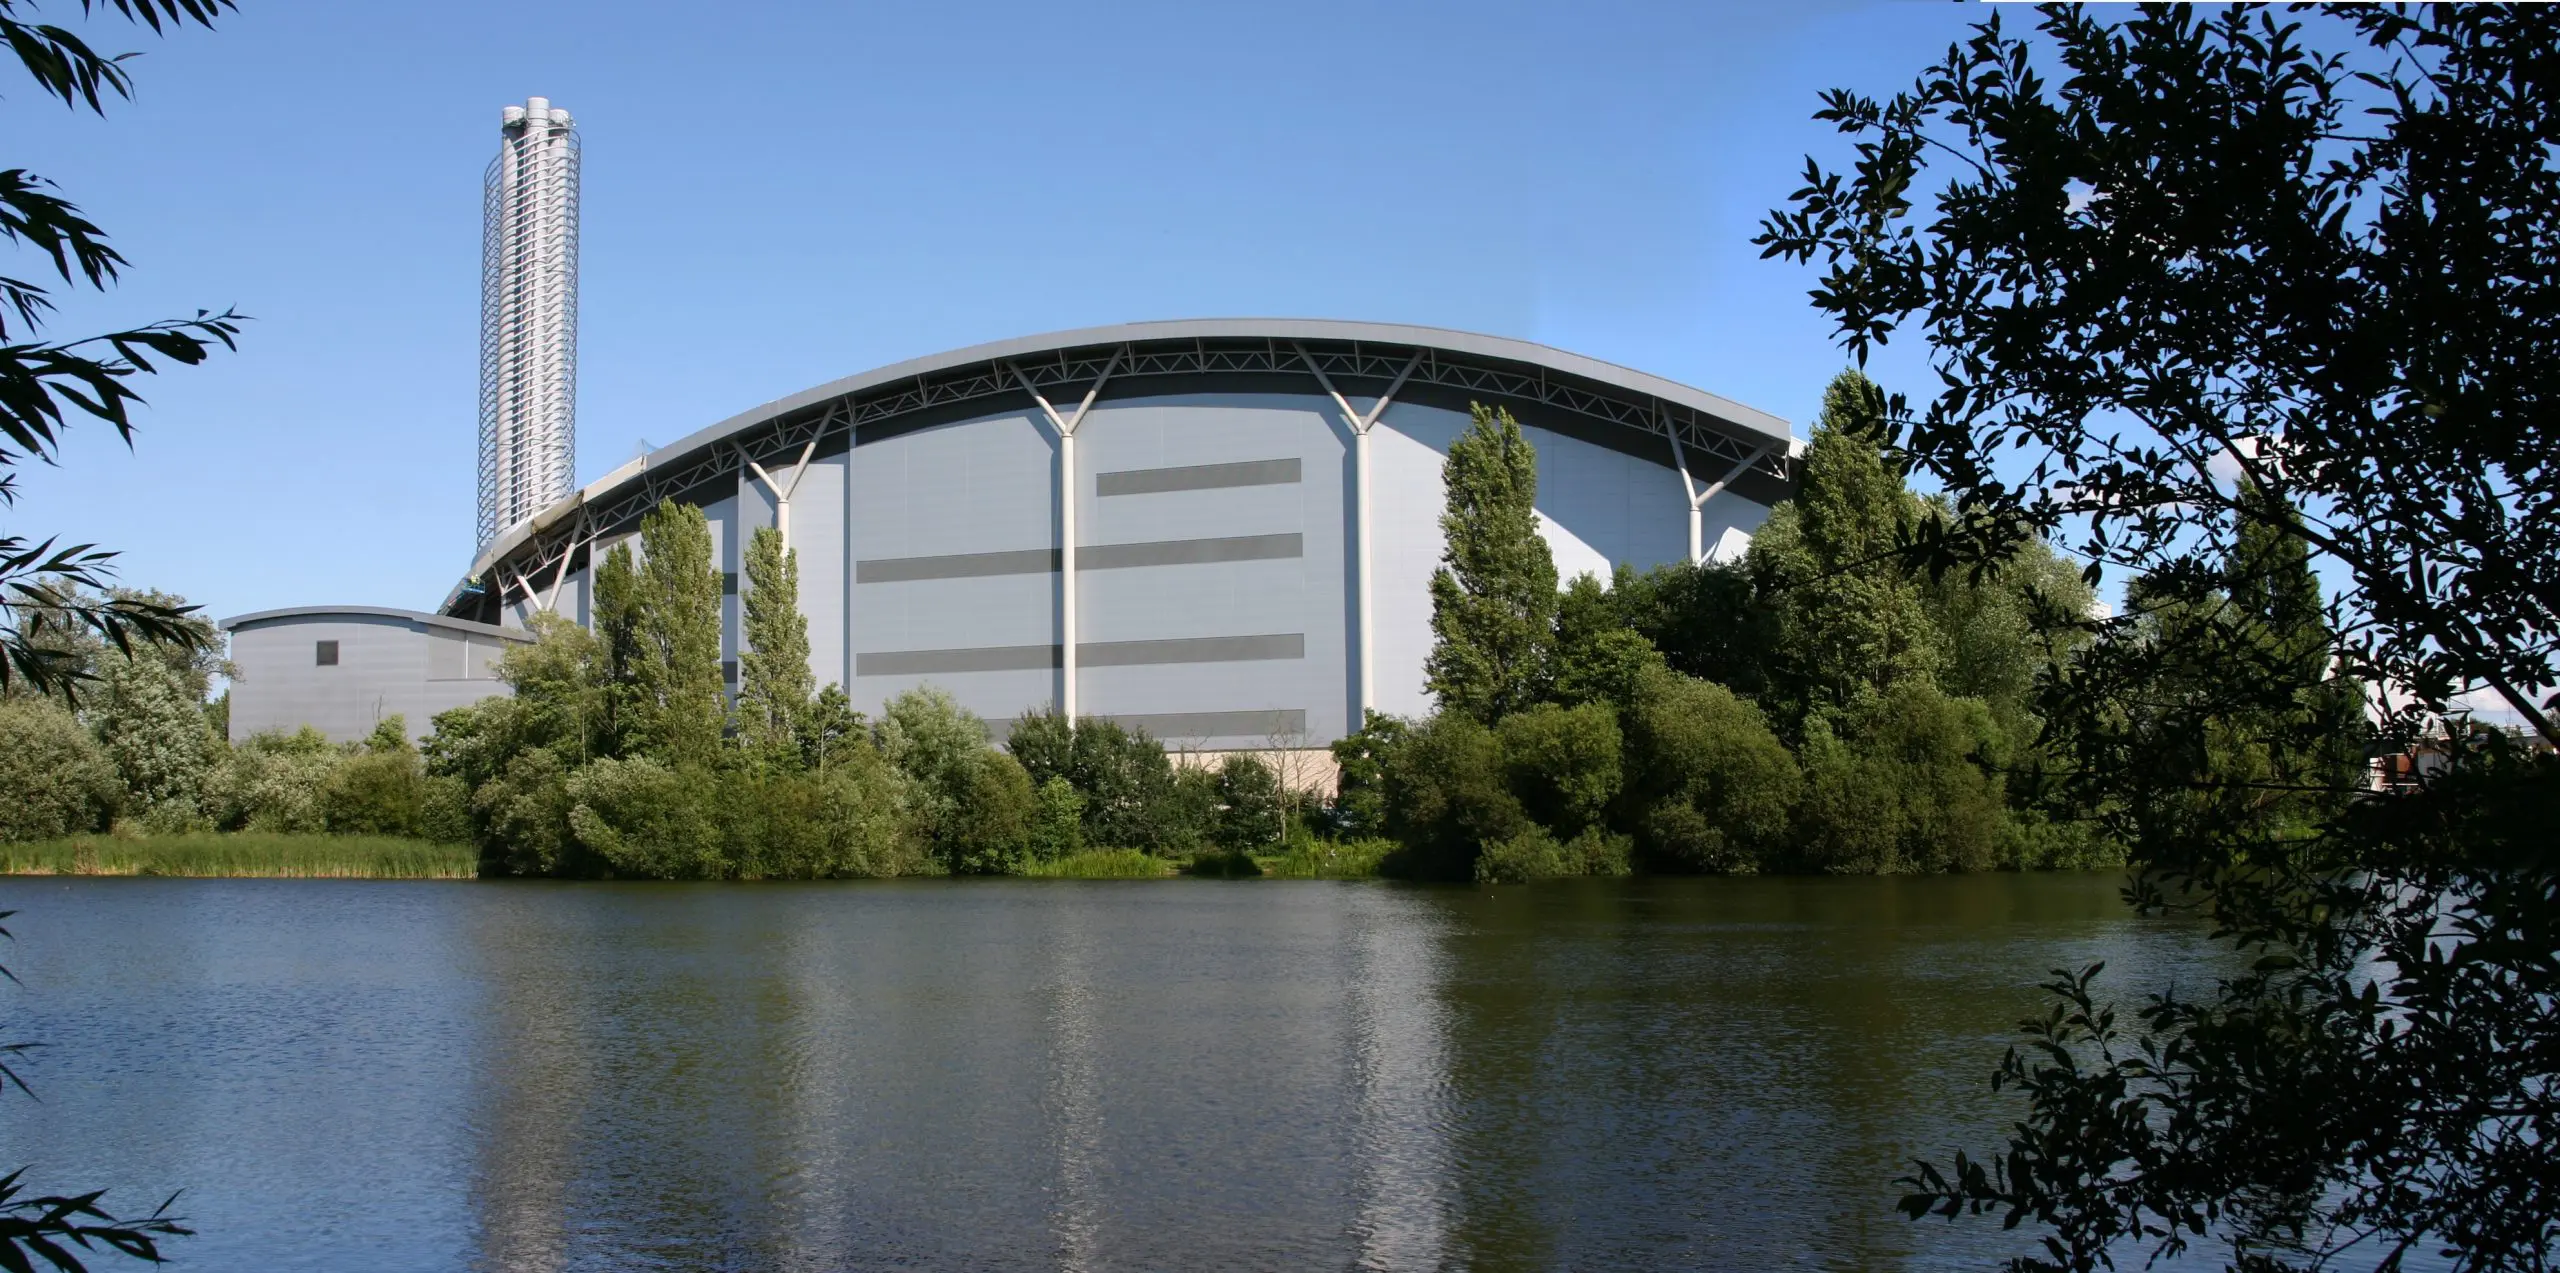 Despite its tranquil appearance, the modern, award winning Lakeside Energy from Waste complex is just off the M25 and M4, close to Heathrow Terminal 5